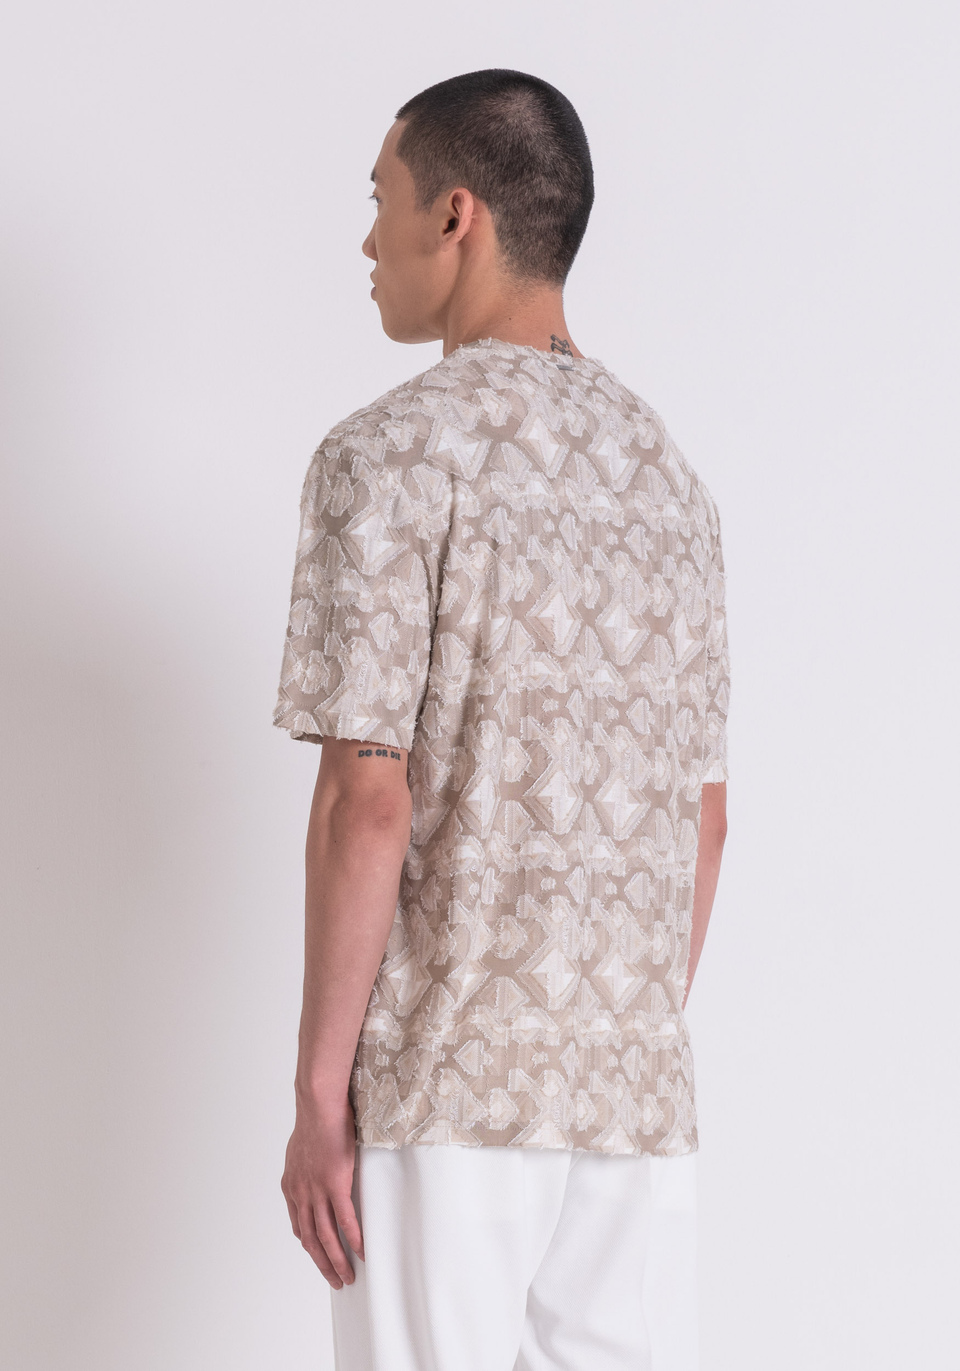 RELAXED FIT T-SHIRT IN JACQUARD VISCOSE BLEND FABRIC - Antony Morato Online Shop